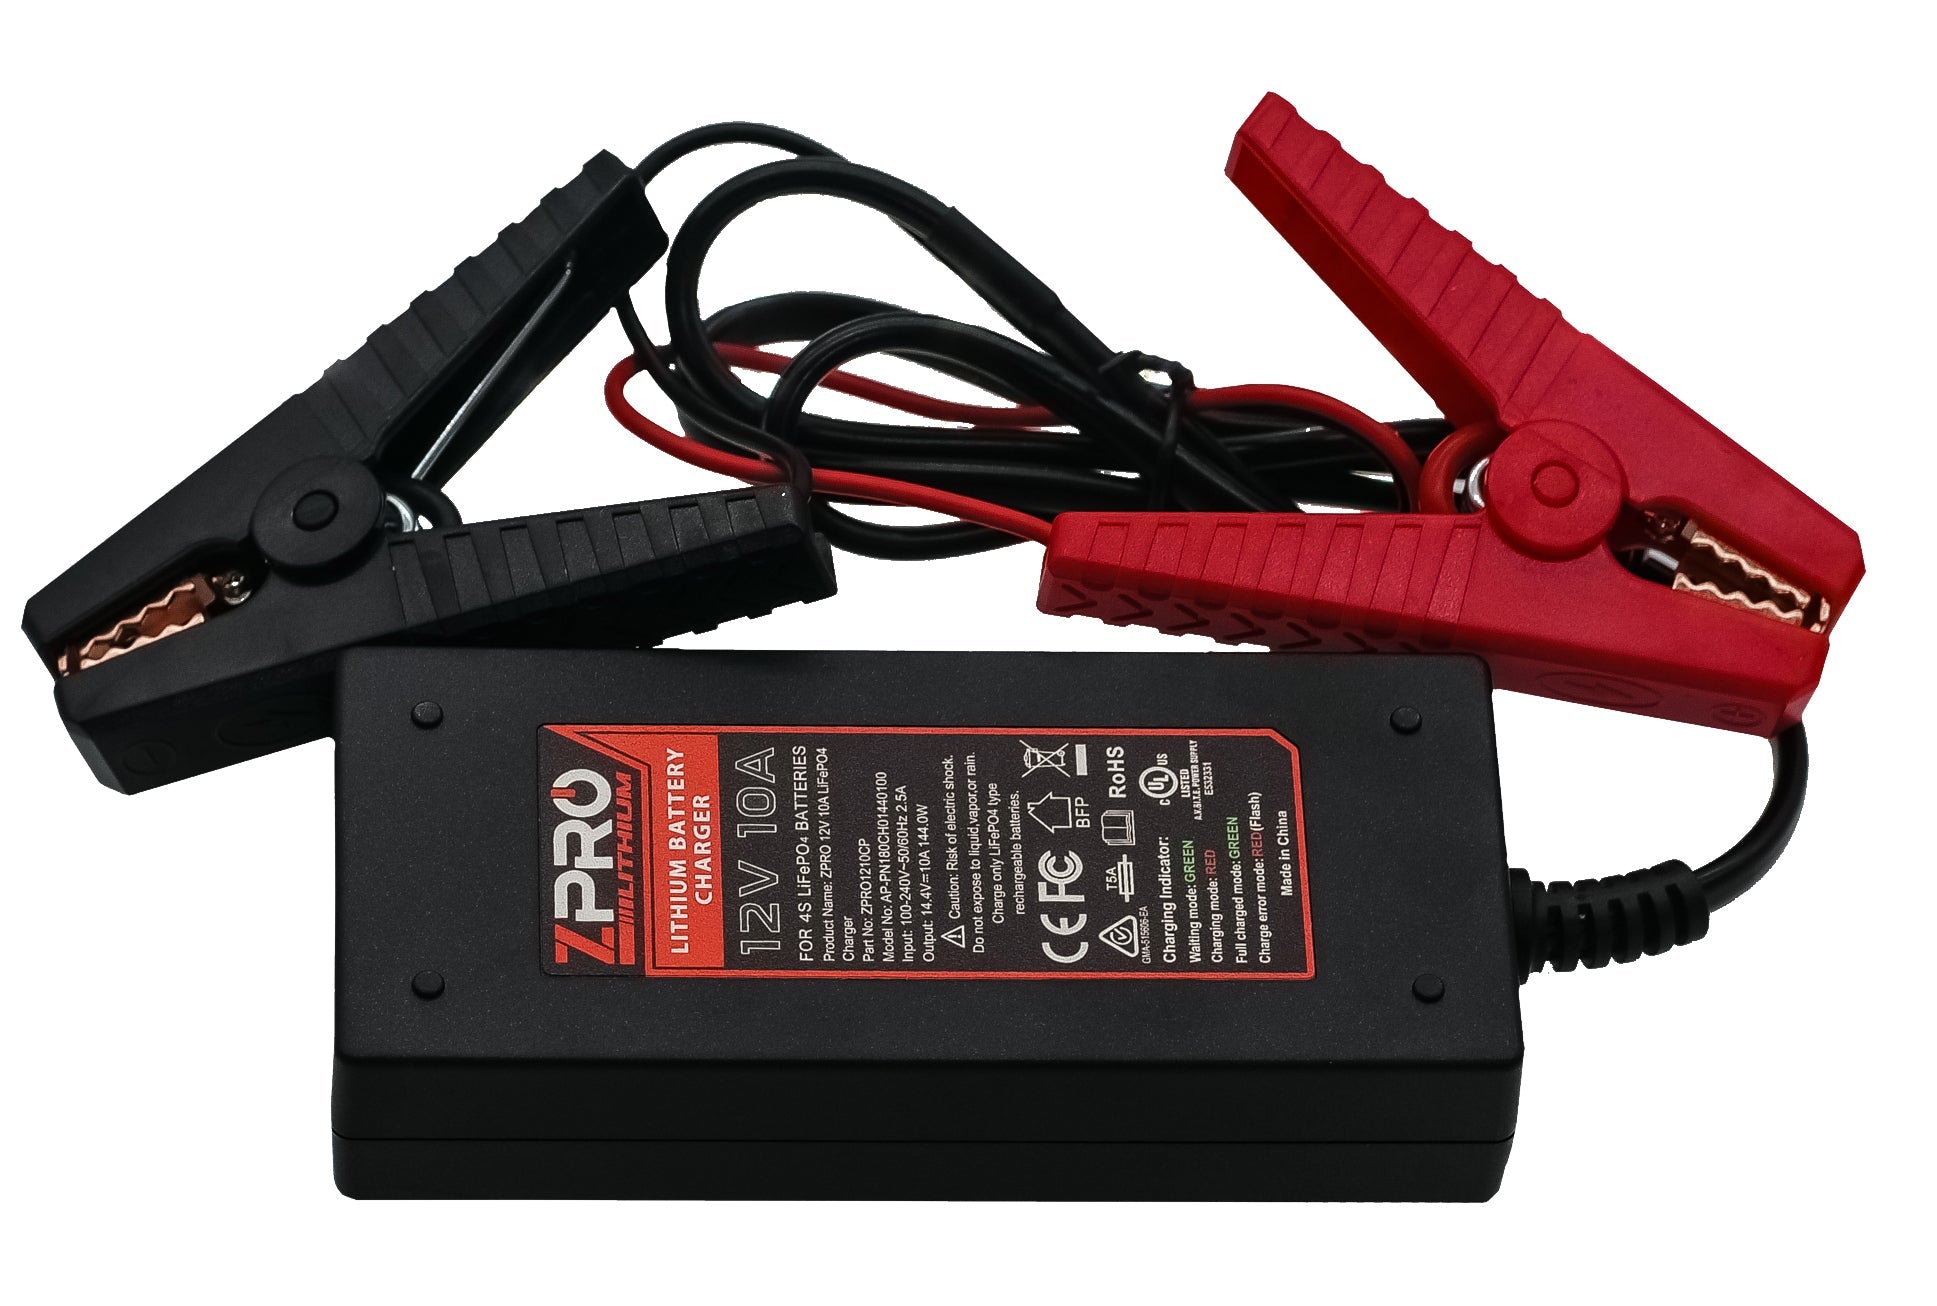 12V10A LITHIUM CHARGER - 0